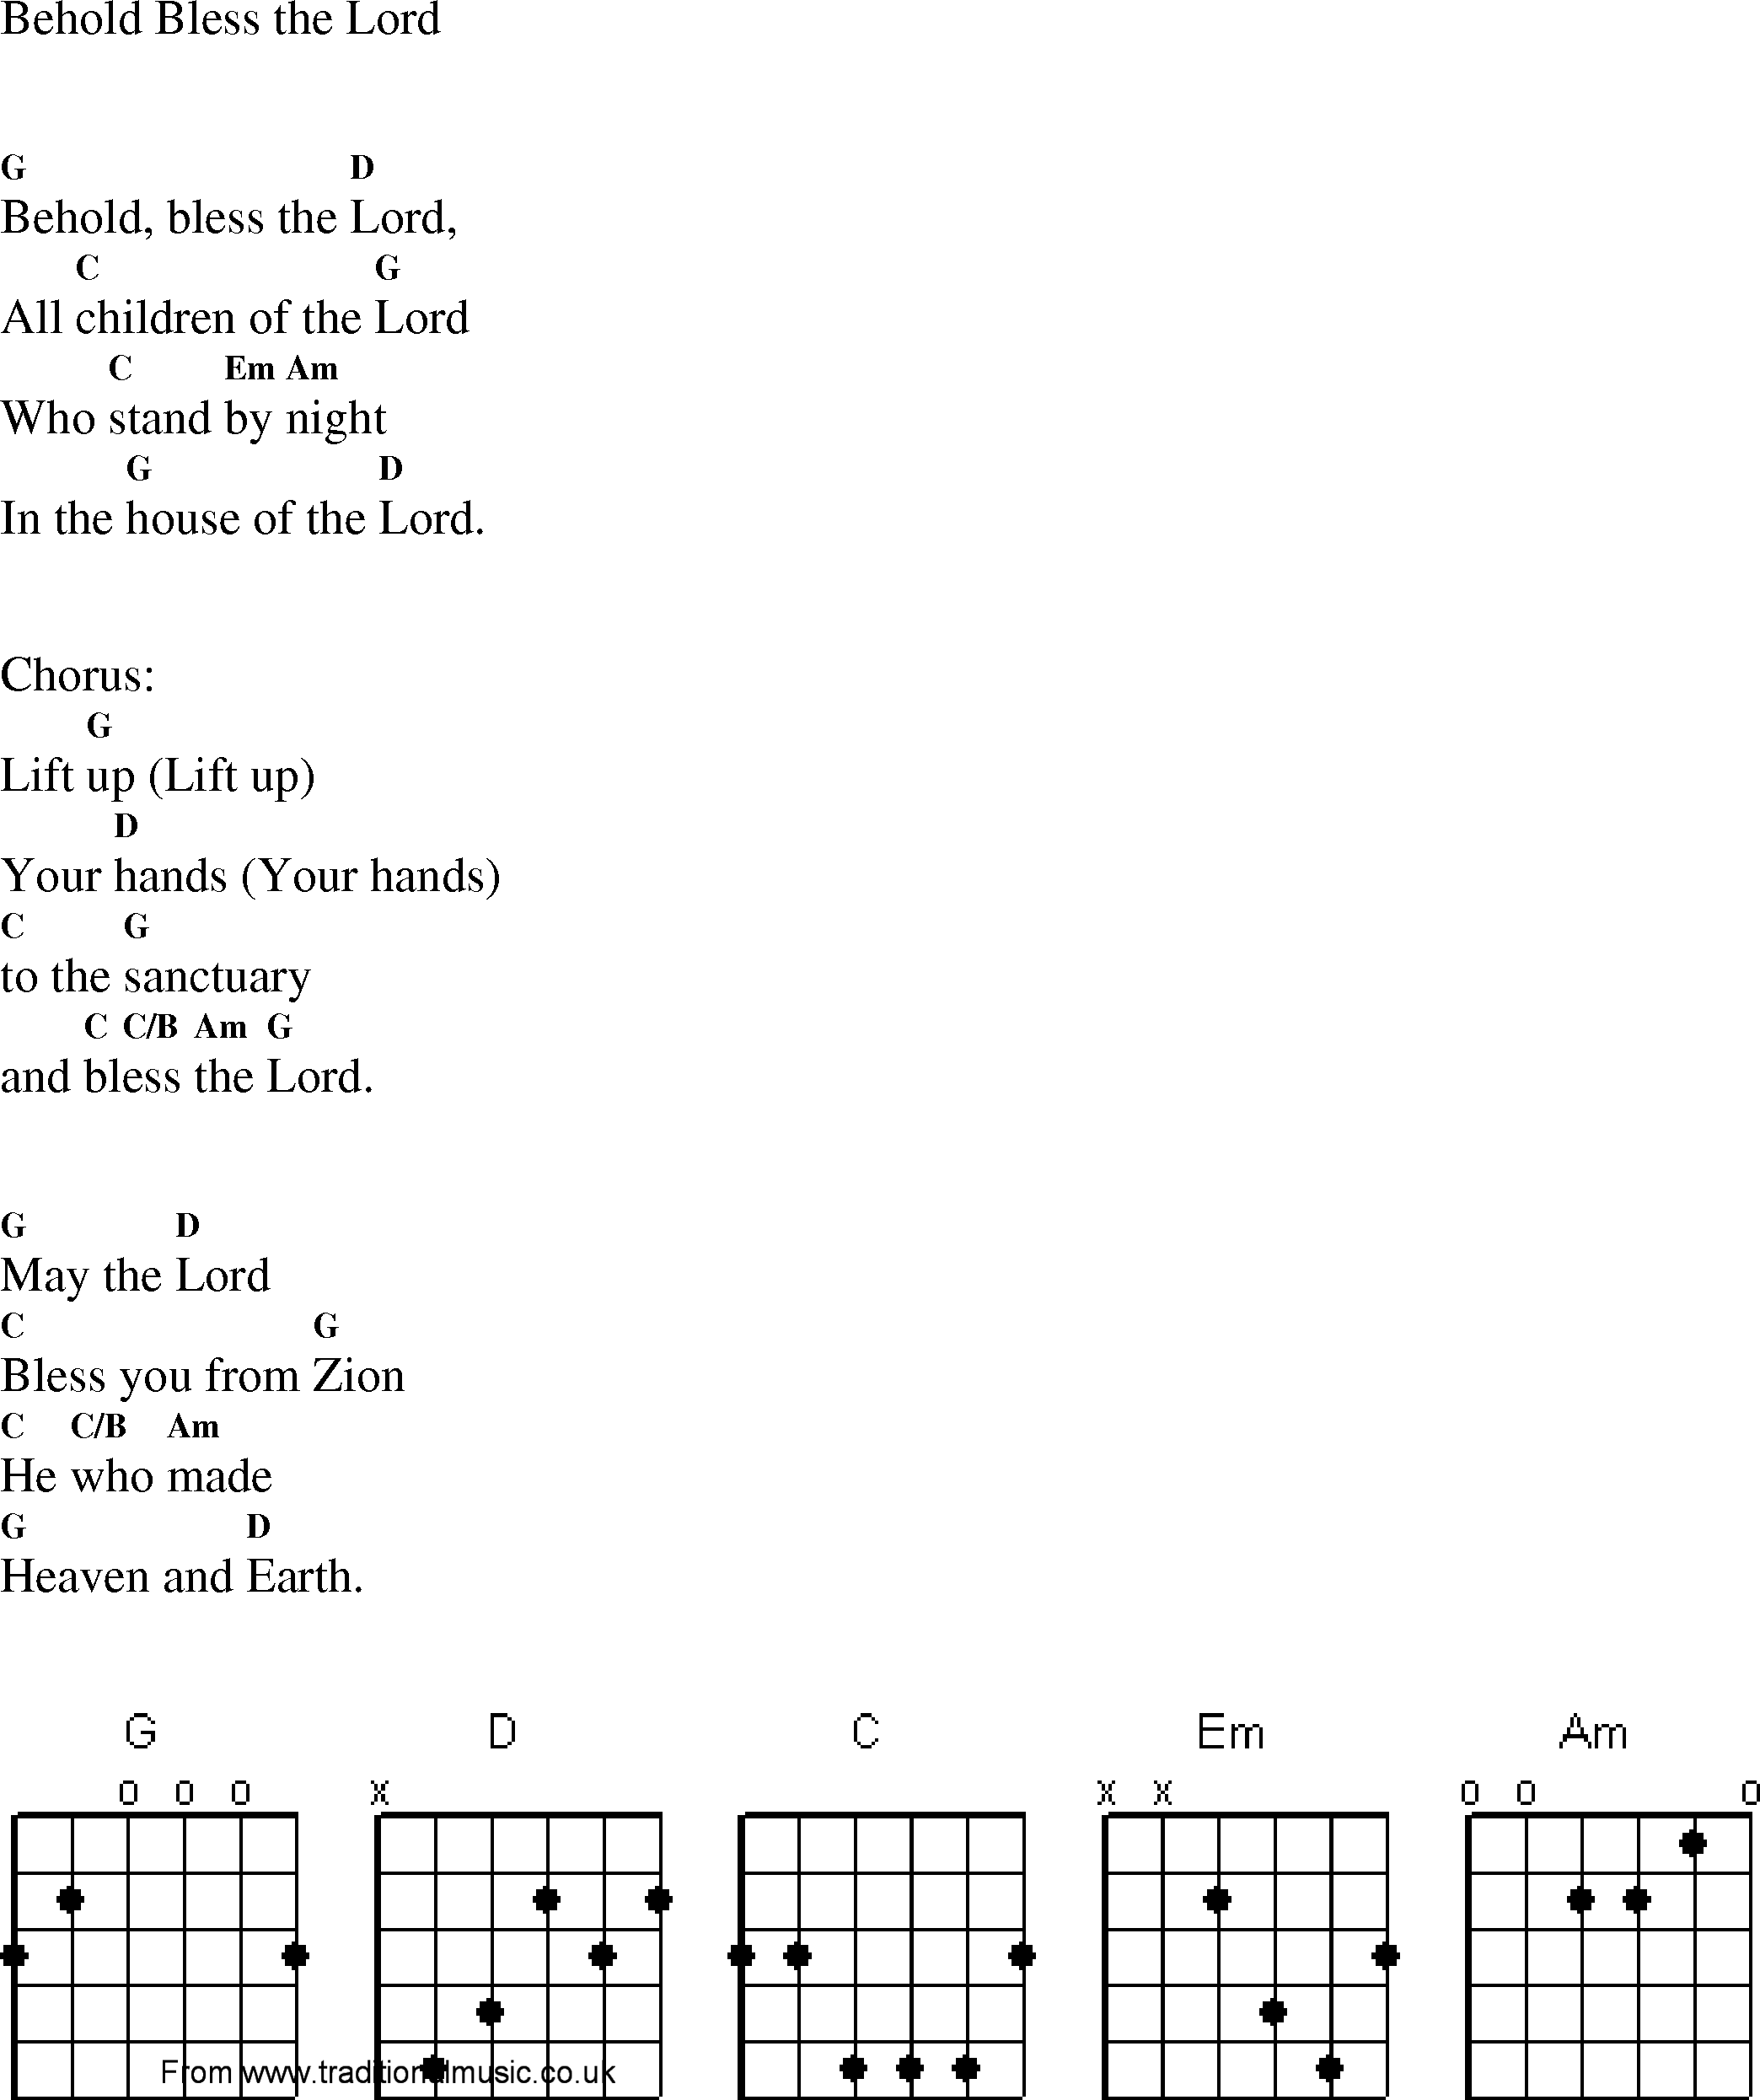 Gospel Song: behold_bless_the_lord, lyrics and chords.